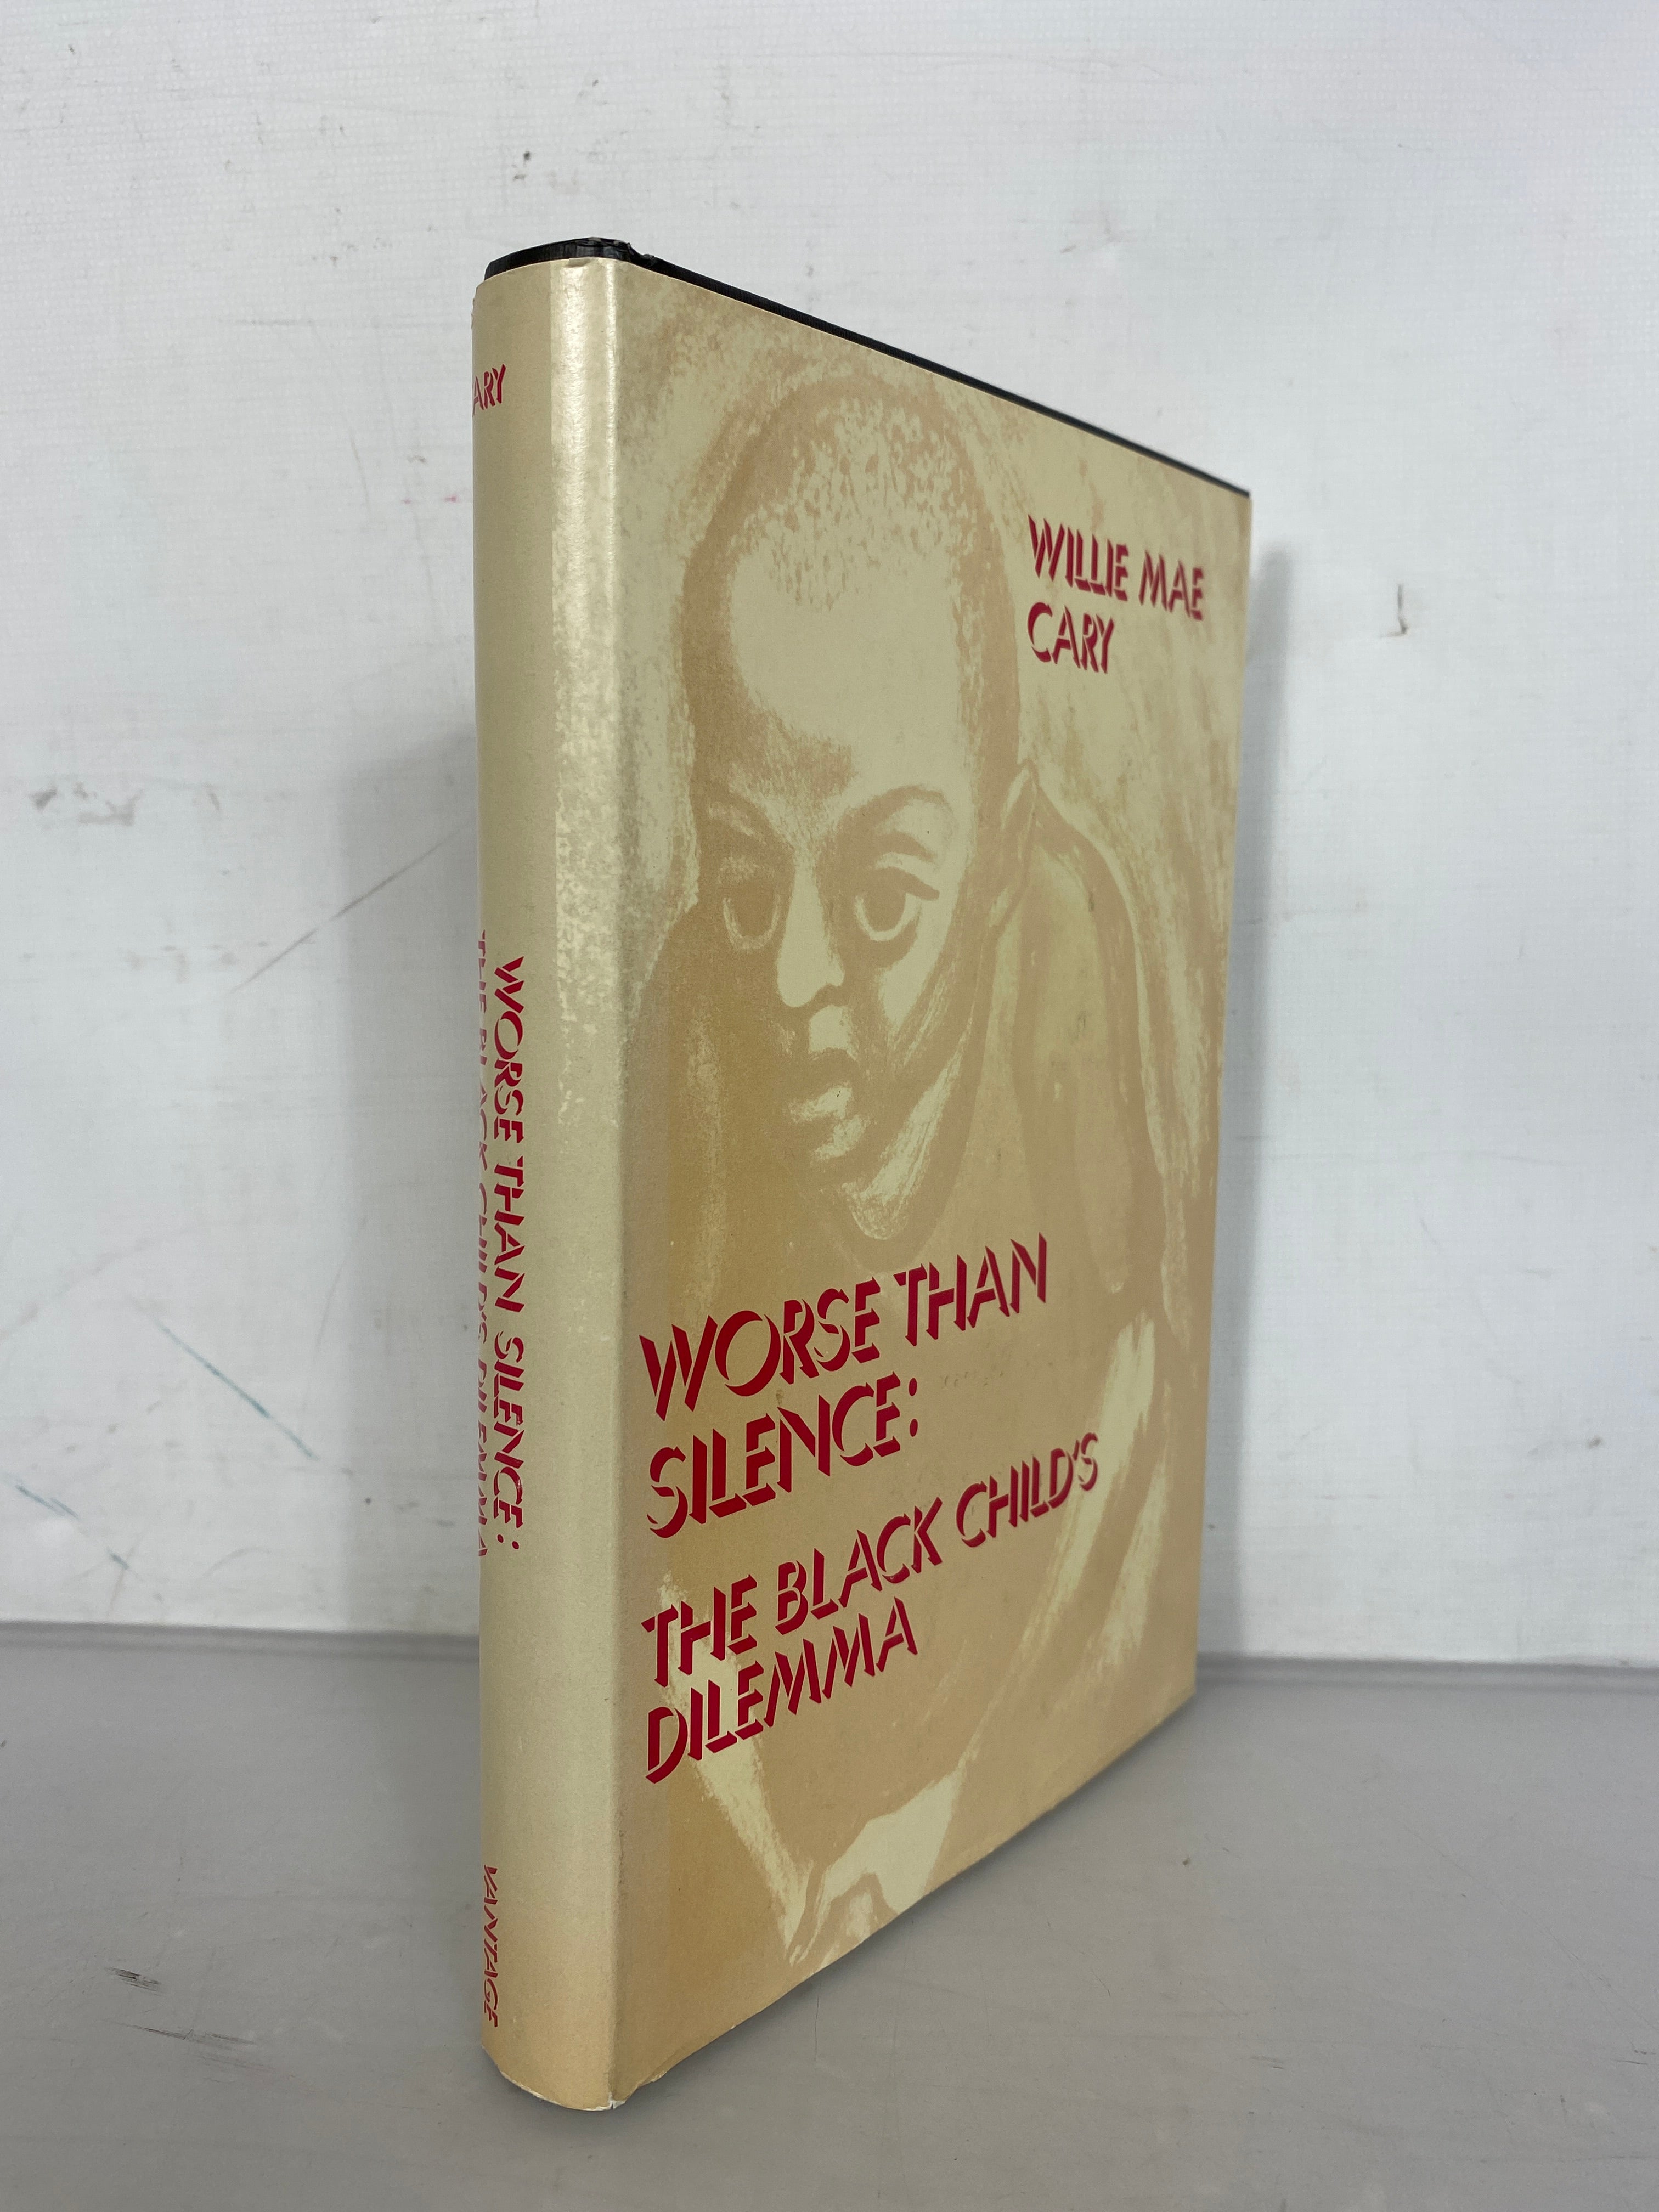 Rare Worse Than Silence: The Black Child's Dilemma by Willie Mae Cary First Edition 1976 HC DJ